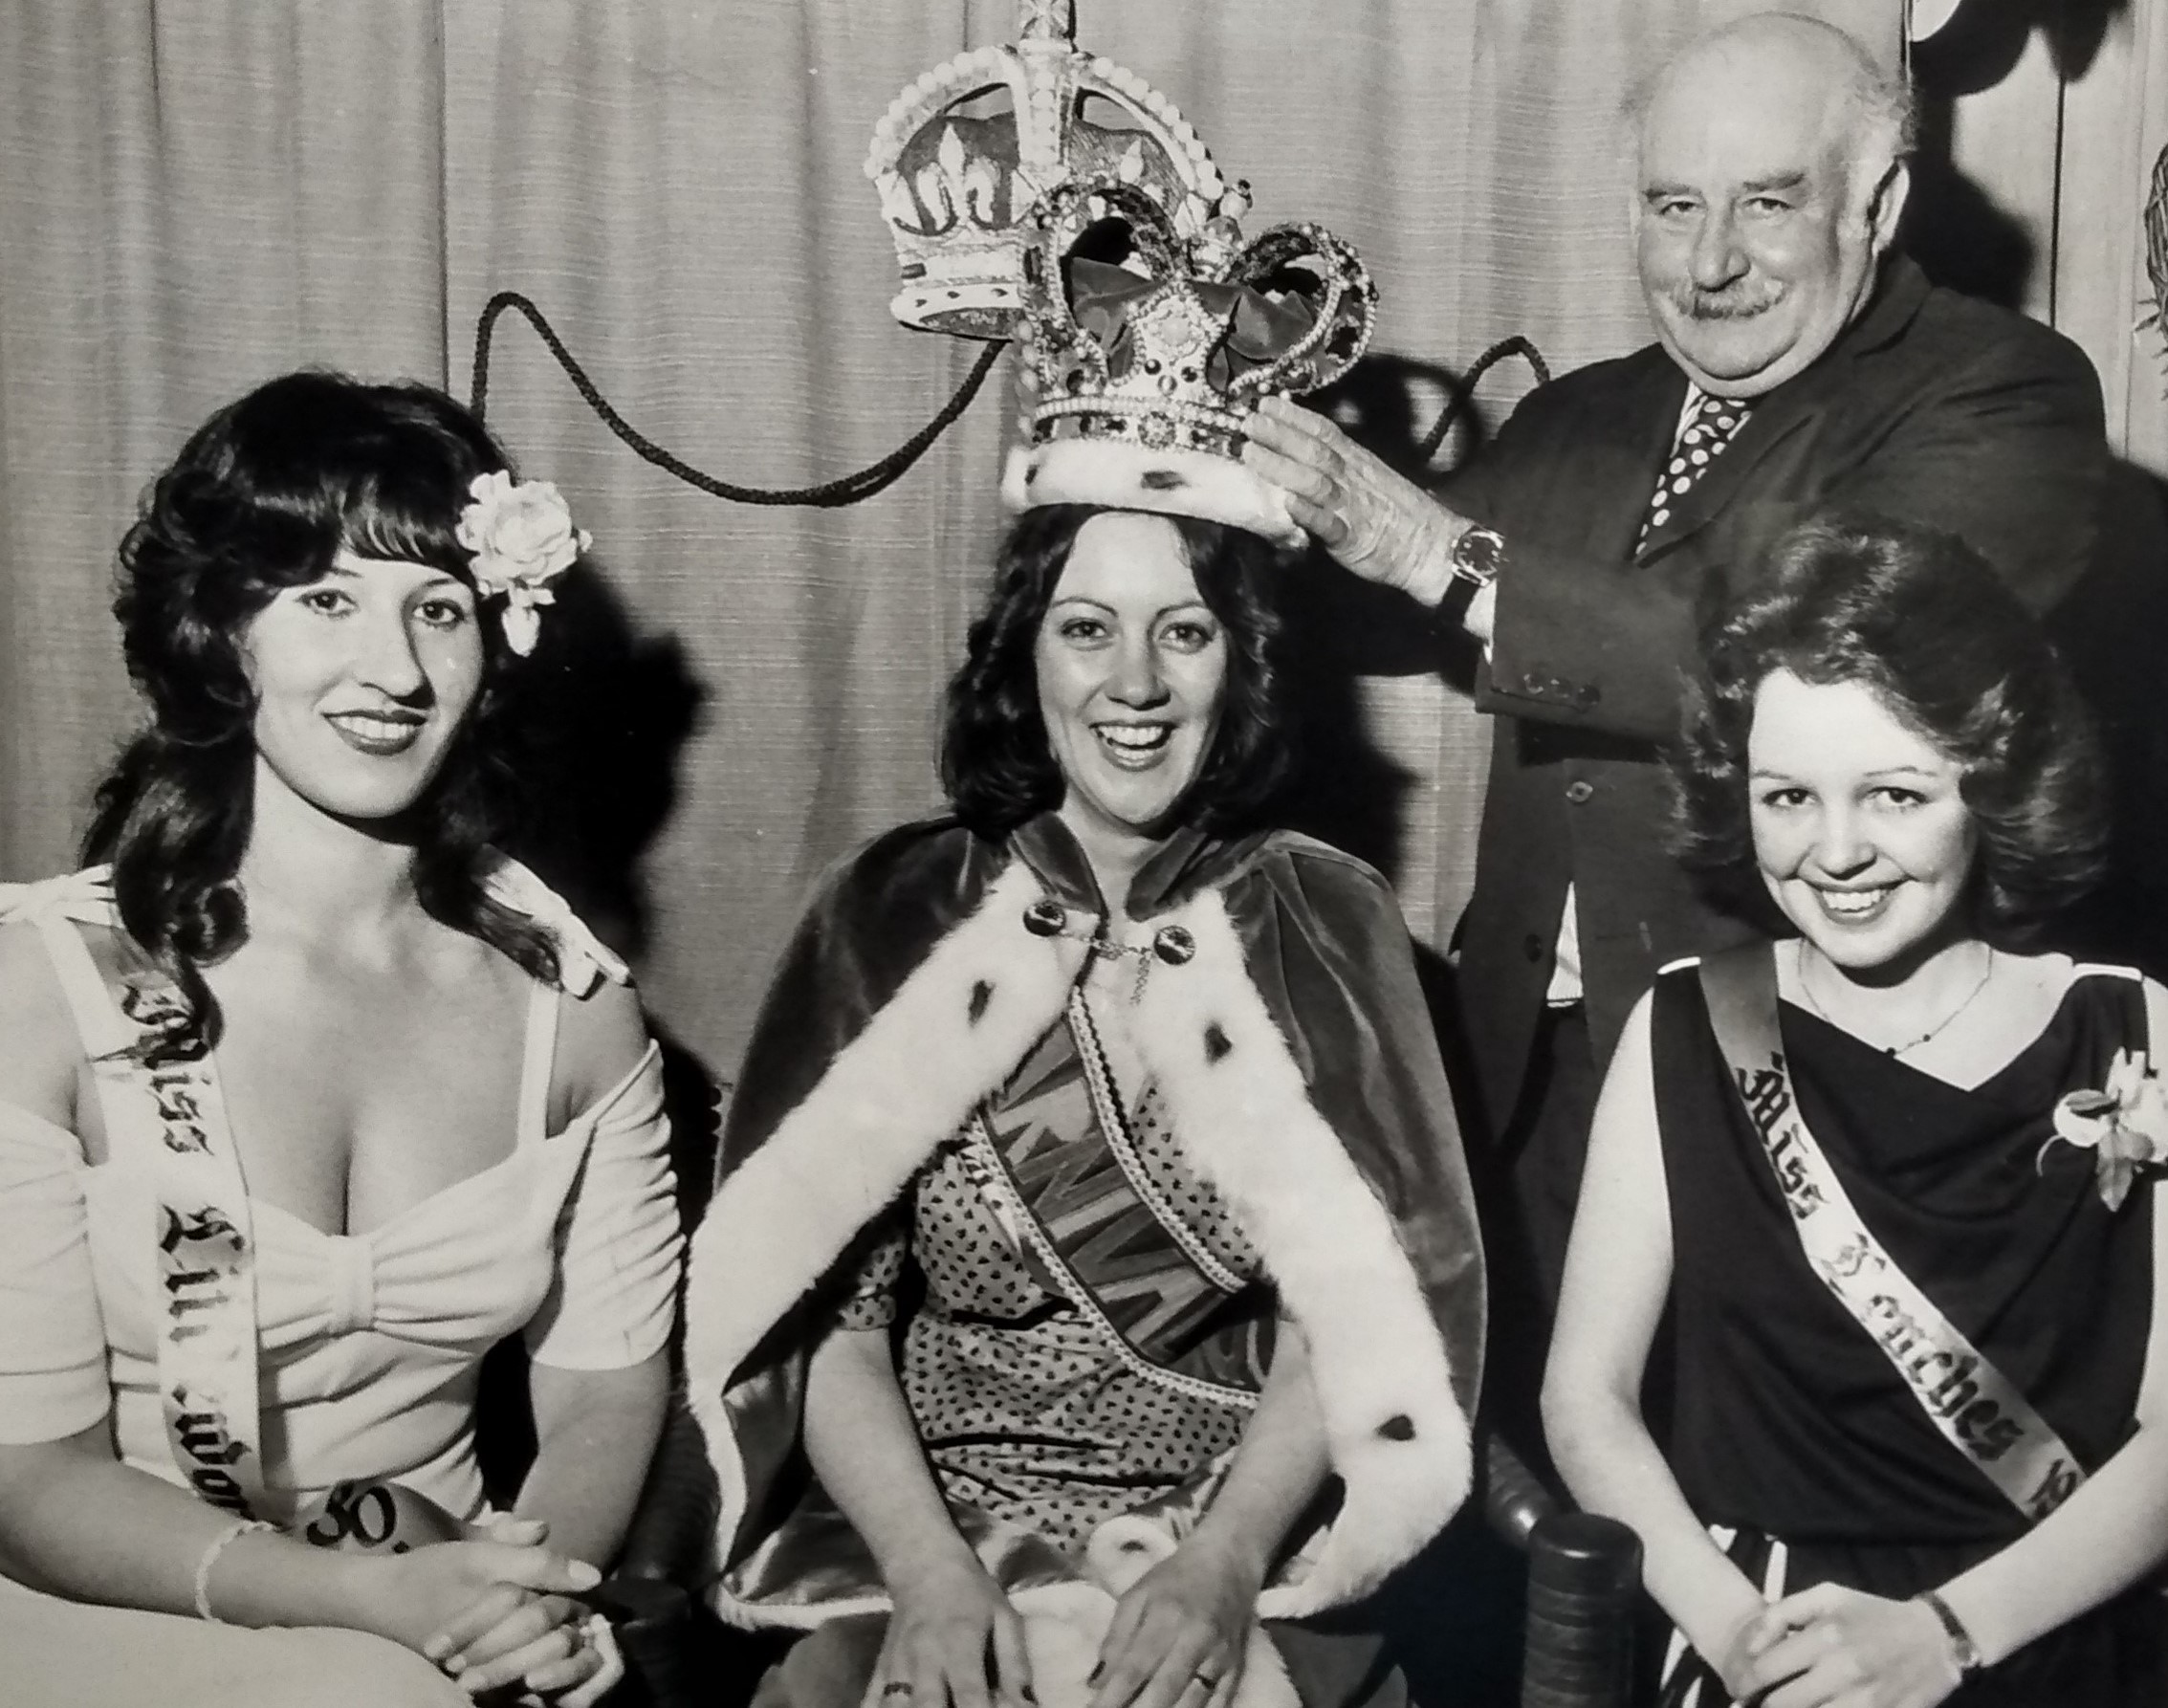 April 1980 and Jean Hadley is crowned Pershore’s Carnival Queen with attendants Naomi Bloodworth, left, and Debbie Tipper